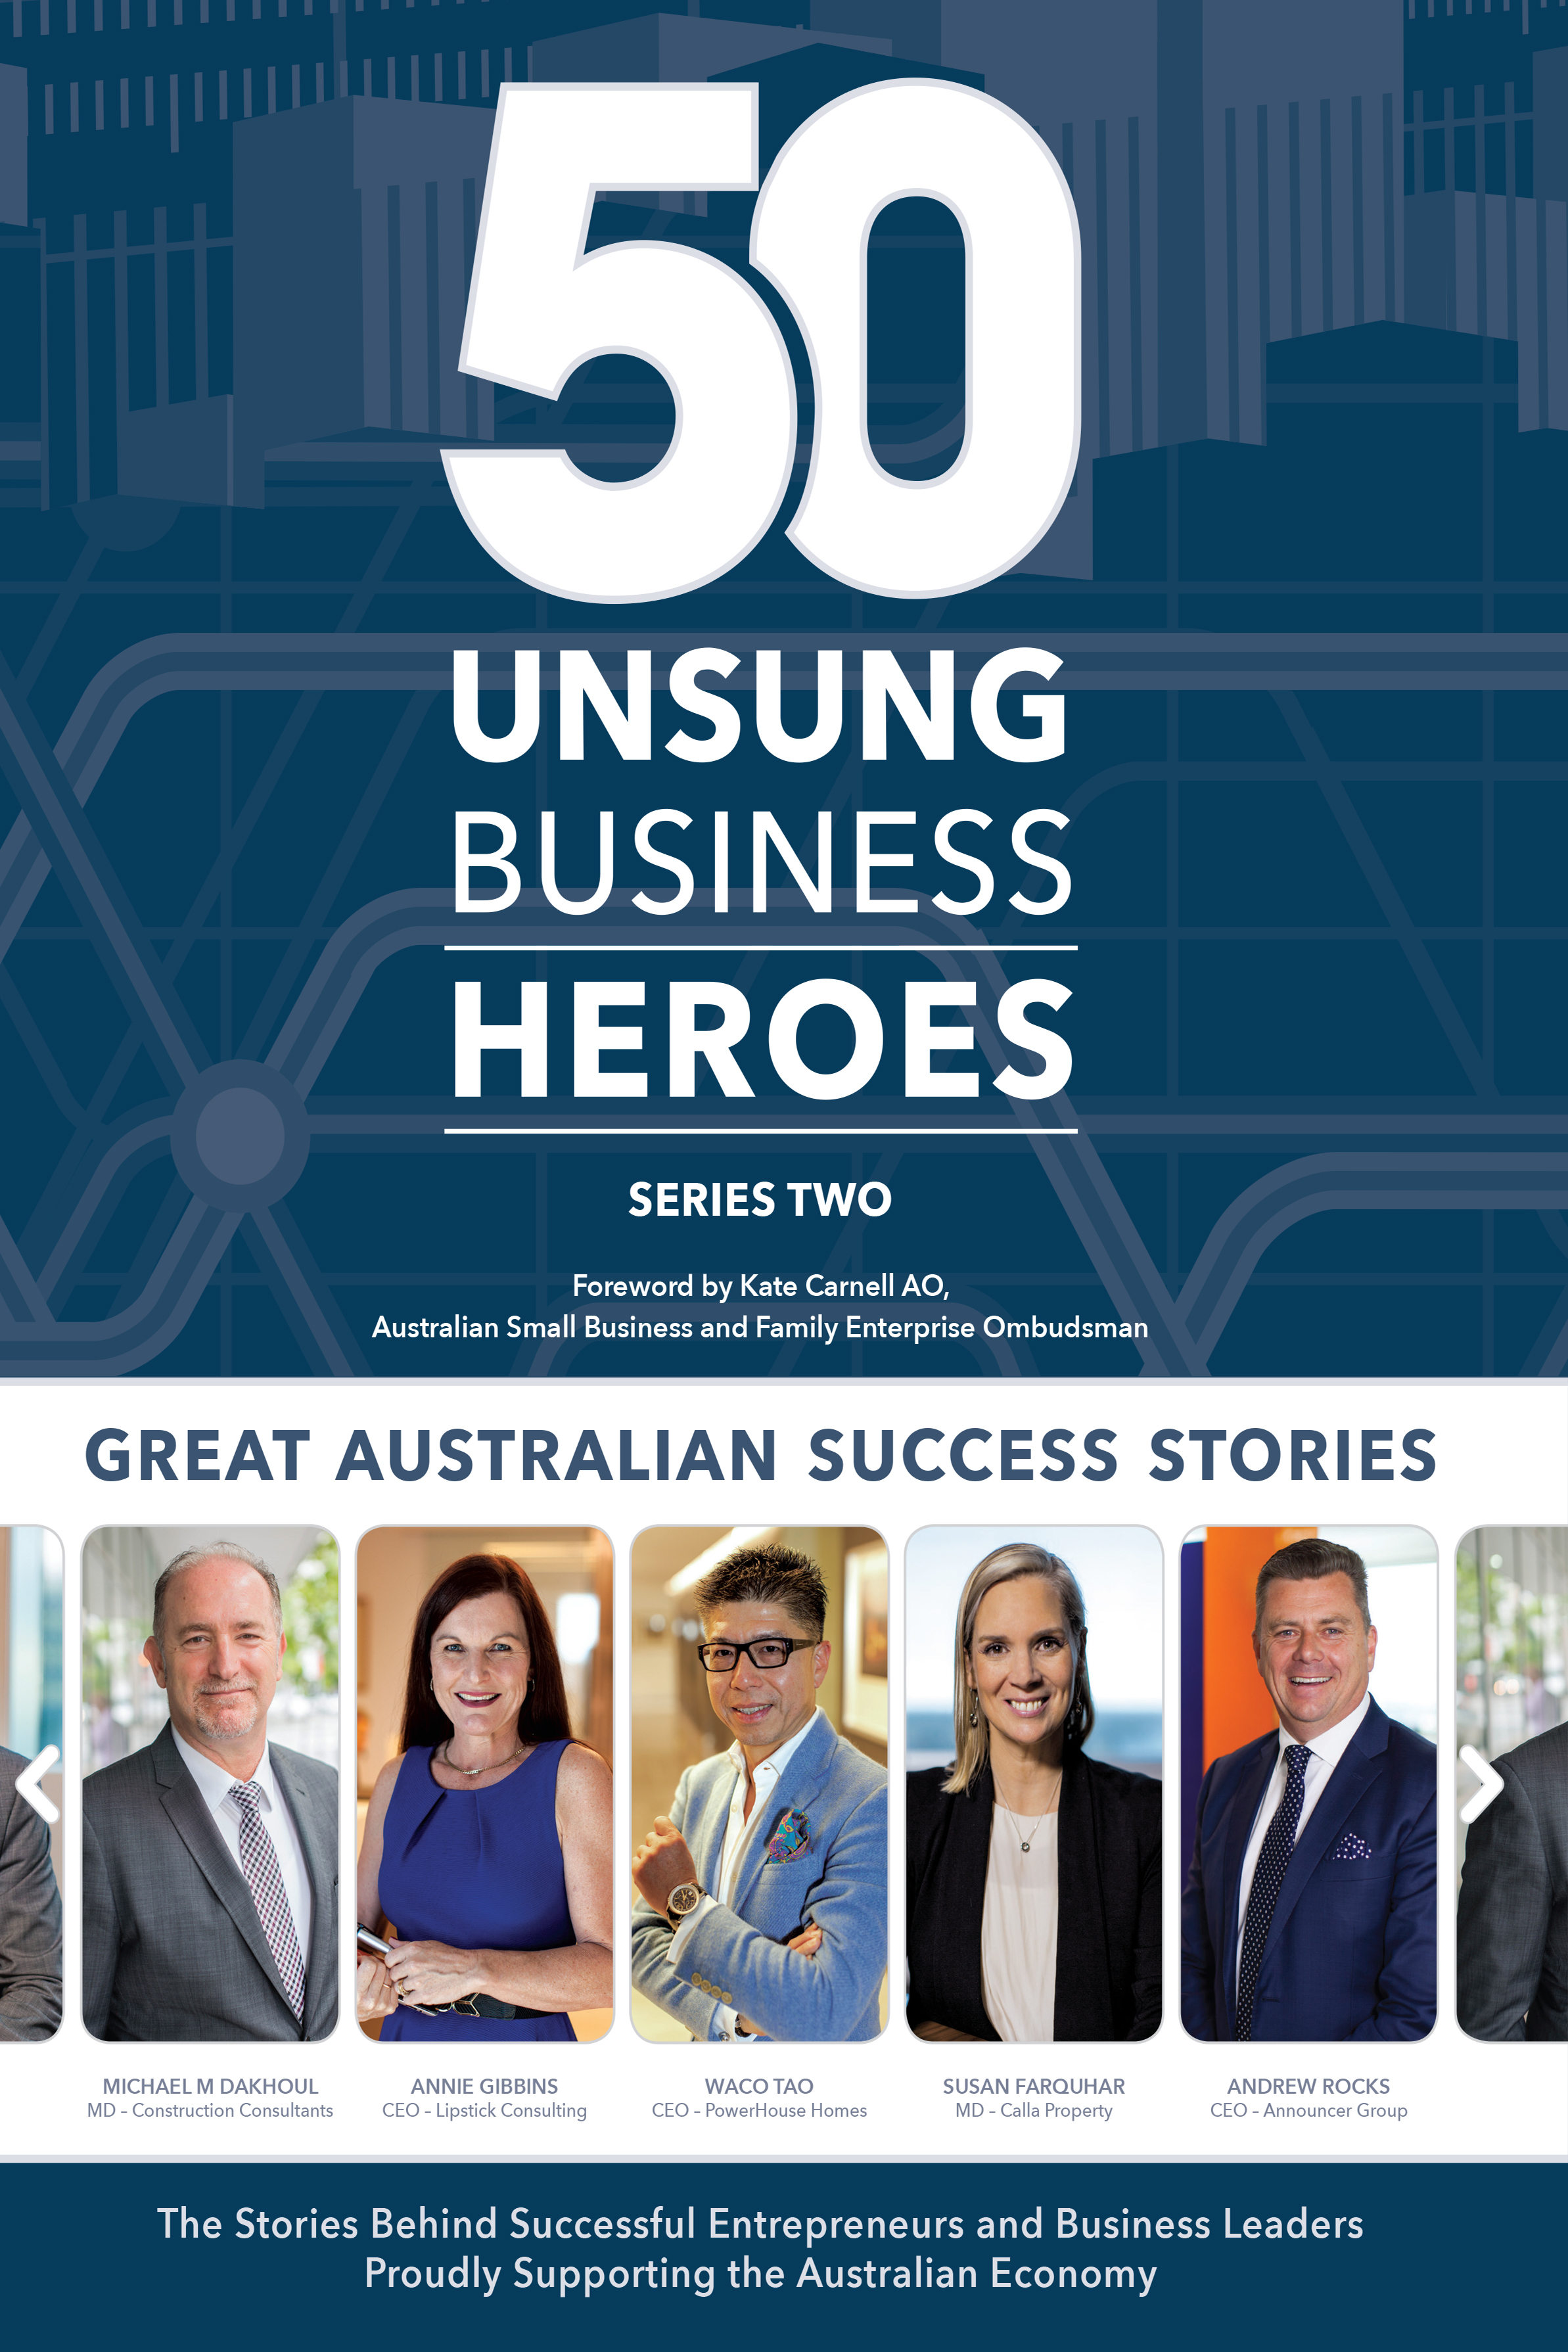 50 Unsung Business Heroes cover.jpg